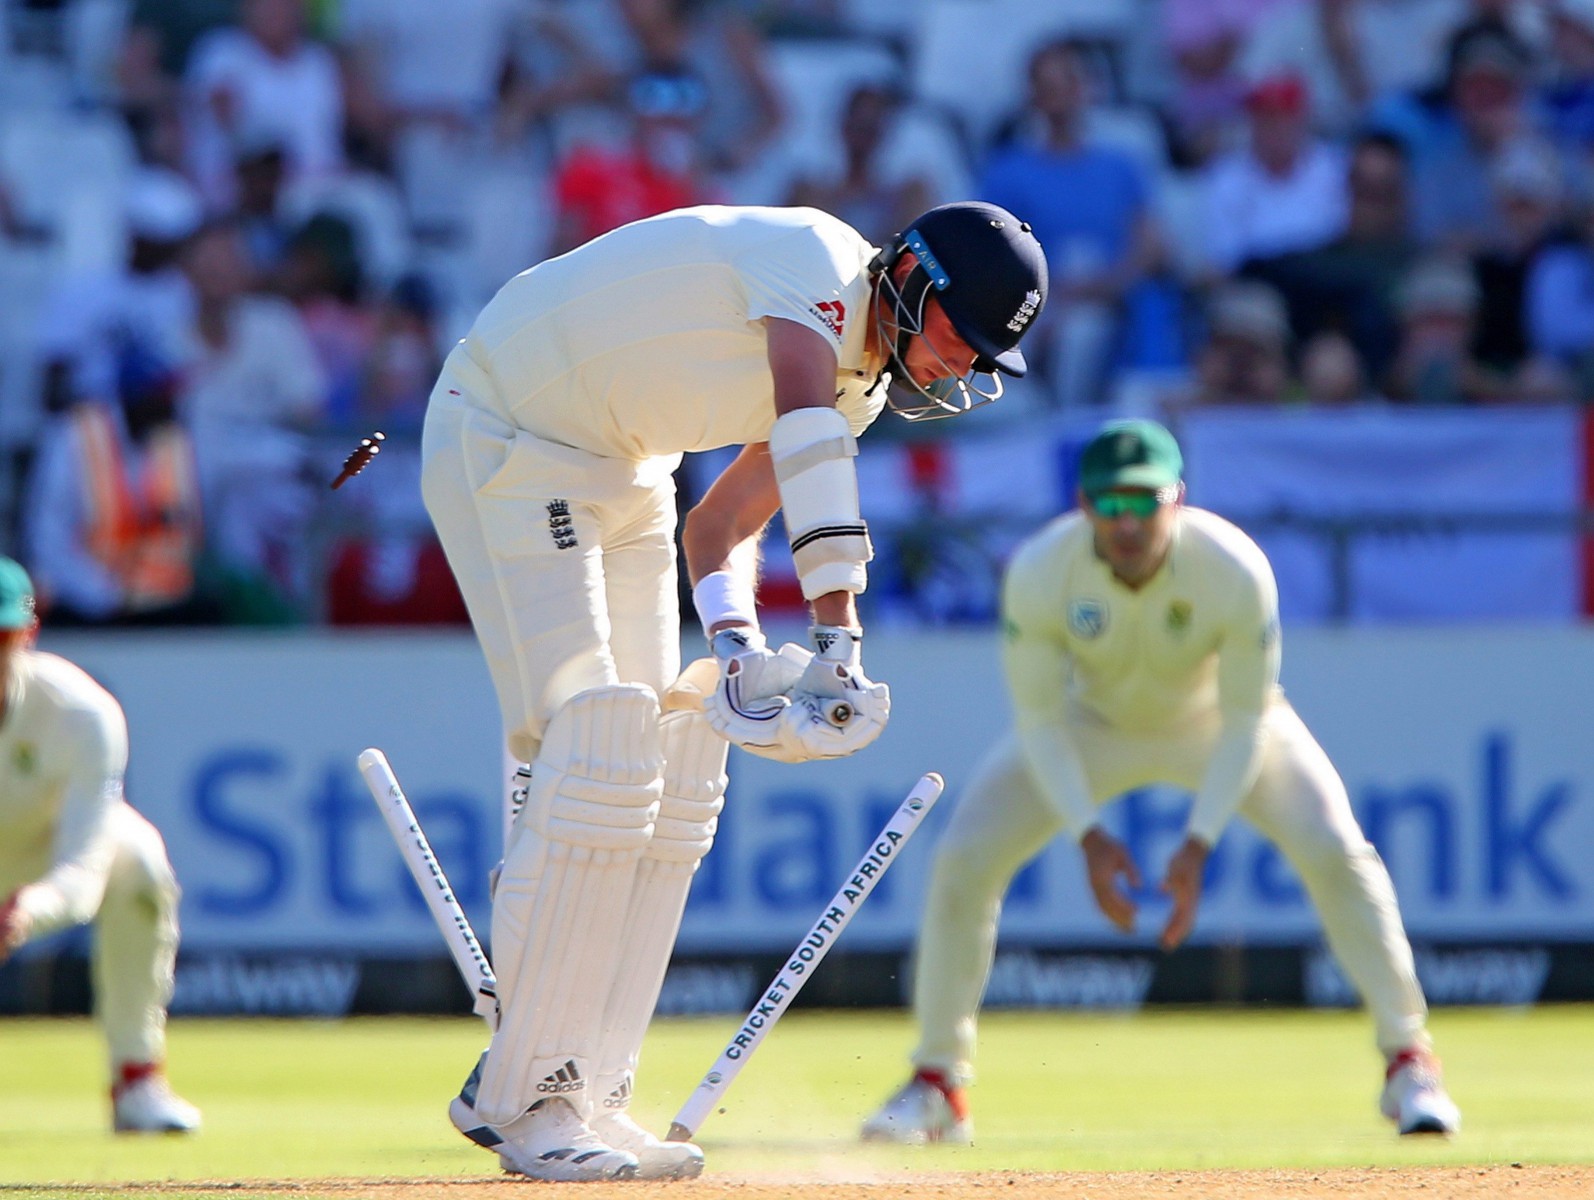 , Englands cursed tour continues with ANOTHER disastrous batting display despite Pope heroics against South Africa